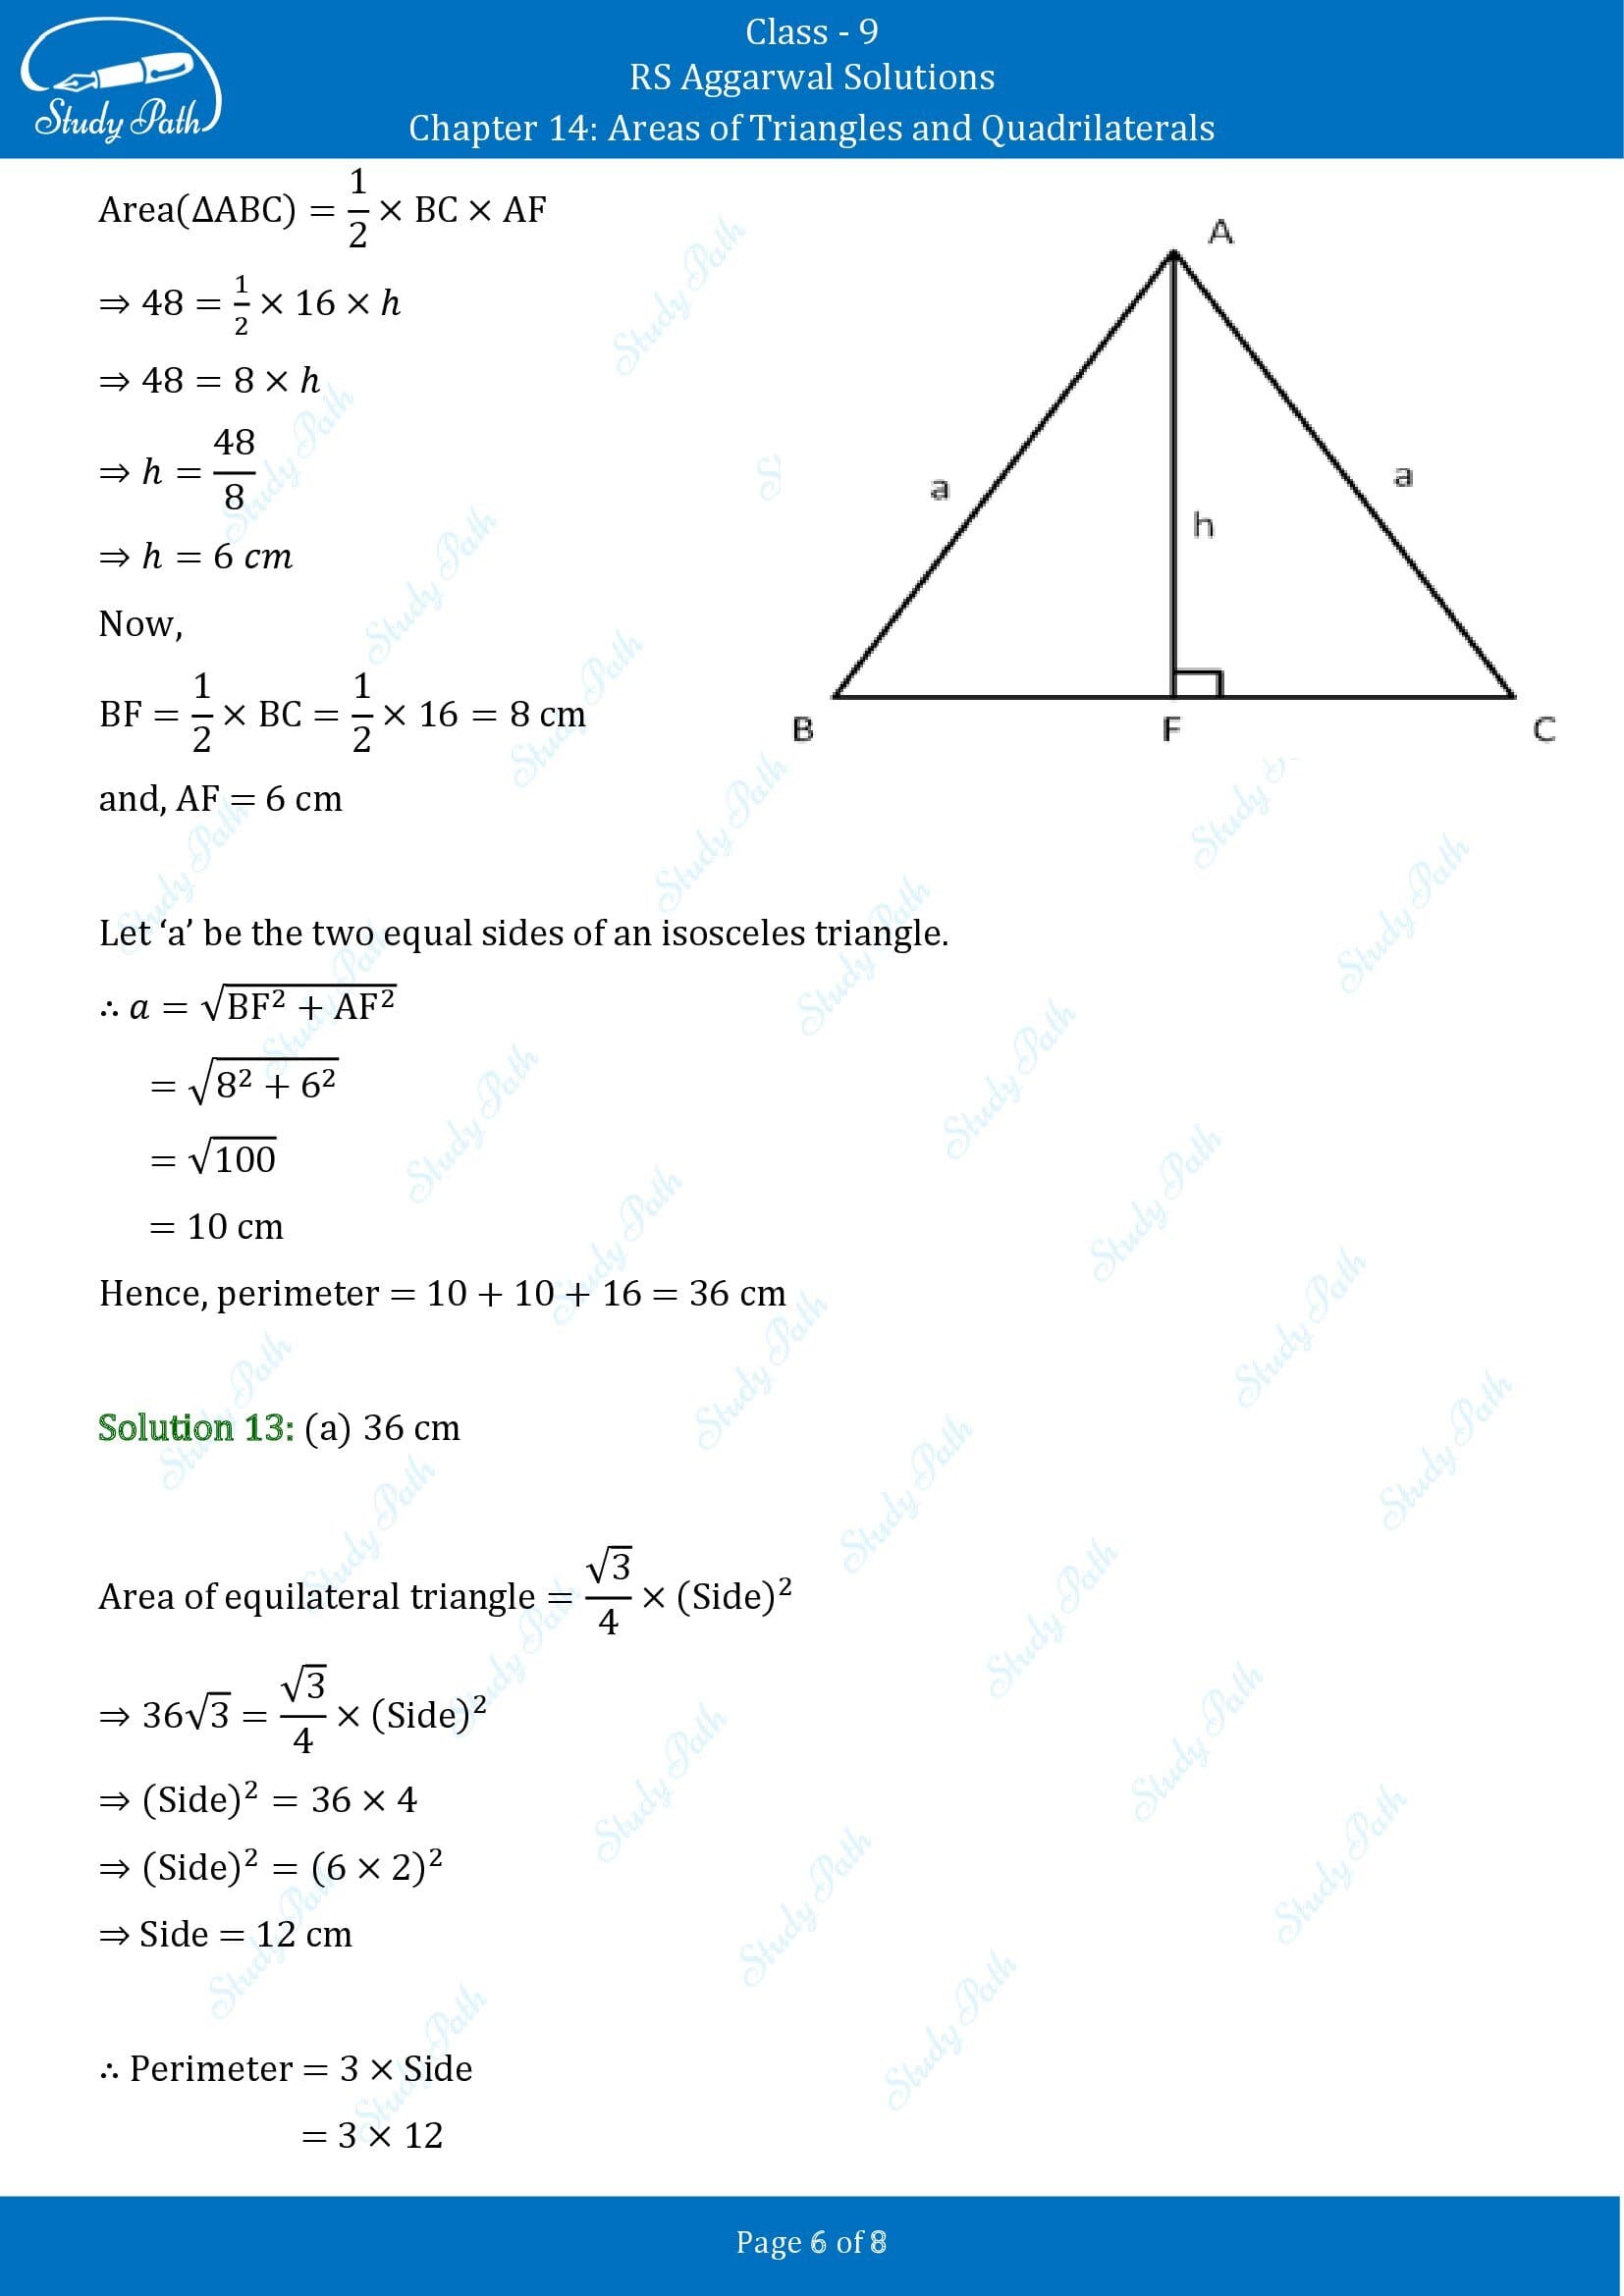 RS Aggarwal Solutions Class 9 Chapter 14 Areas of Triangles and Quadrilaterals Multiple Choice Questions MCQs 00006